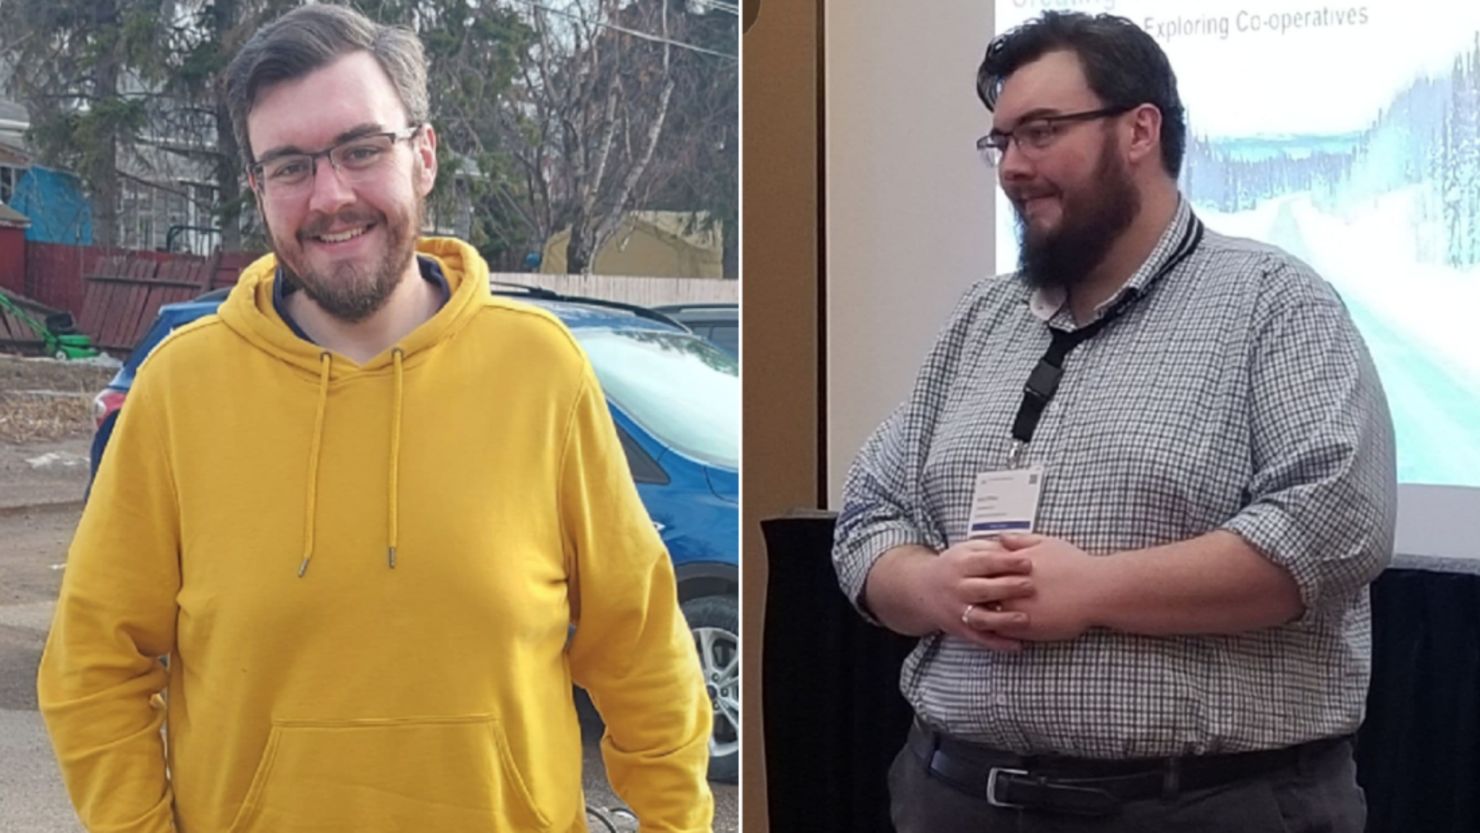 Loveland man loses nearly 100 pounds over pandemic, now working to